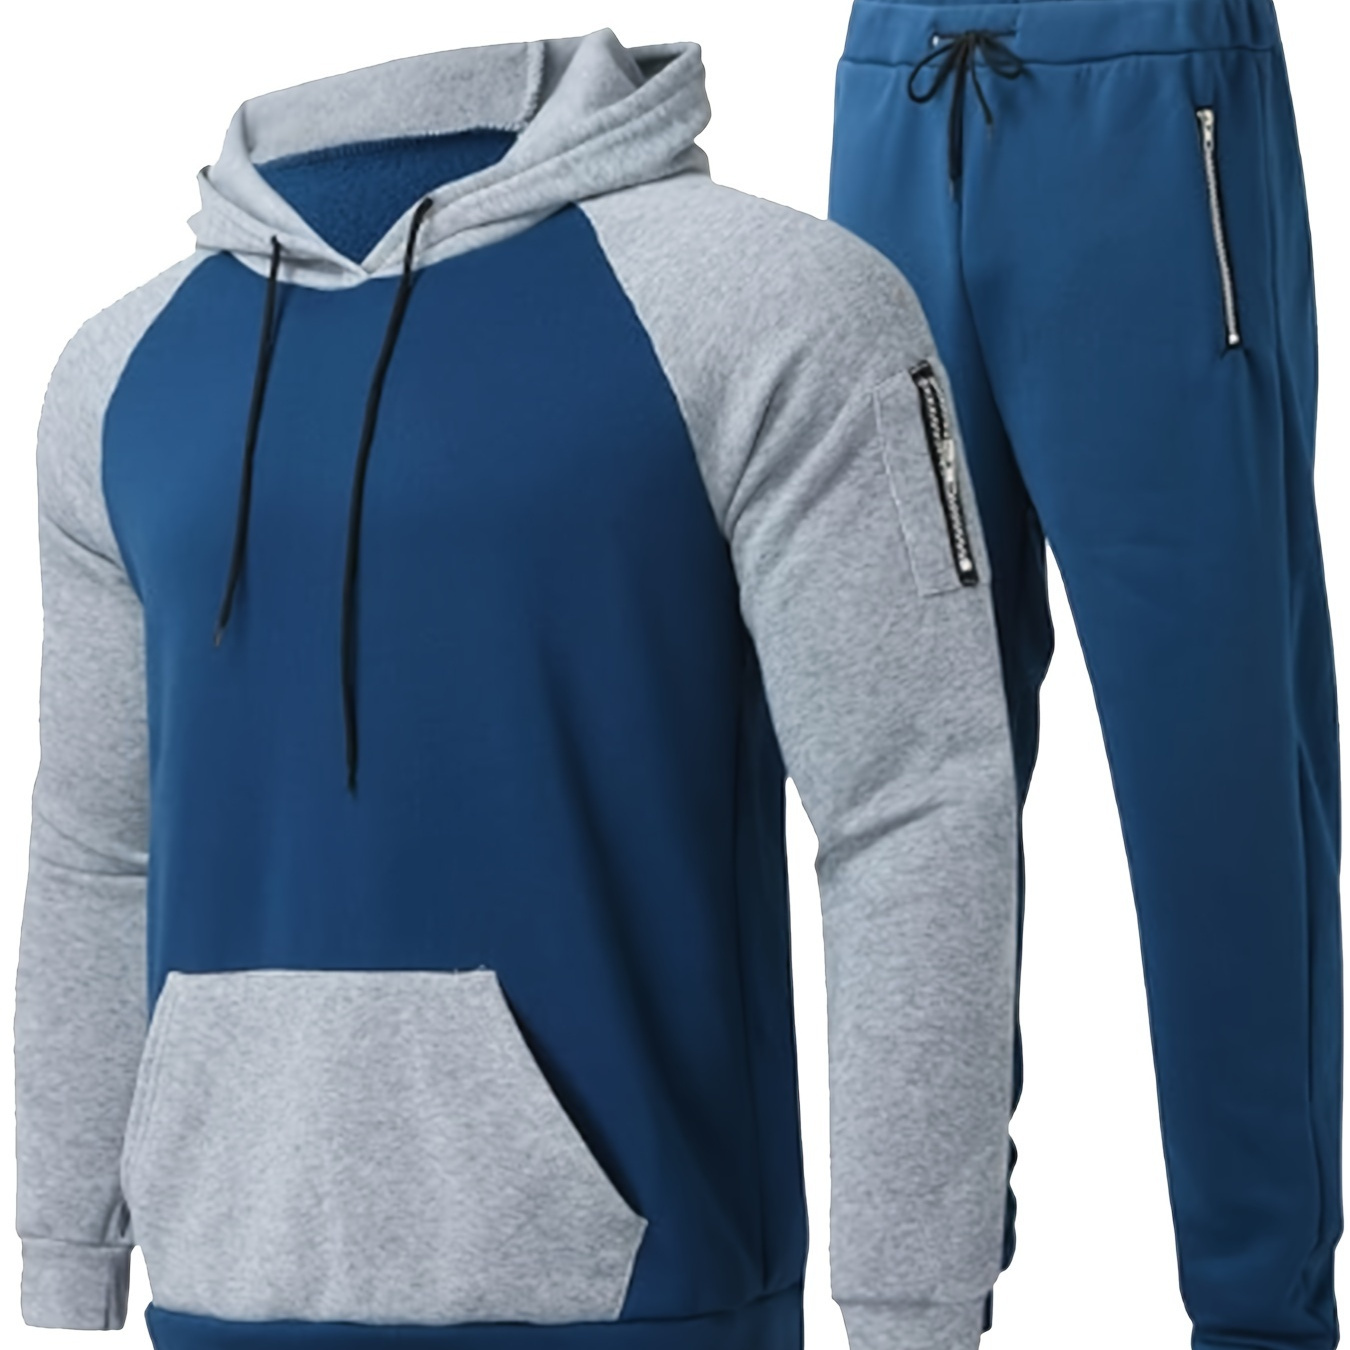 

Plus Size Men's Contrast Color Hooded Sweatshirt & Sweatpants Set For Fall Winter, Fashion Casual 2pcs Outfits, Men's Clothing